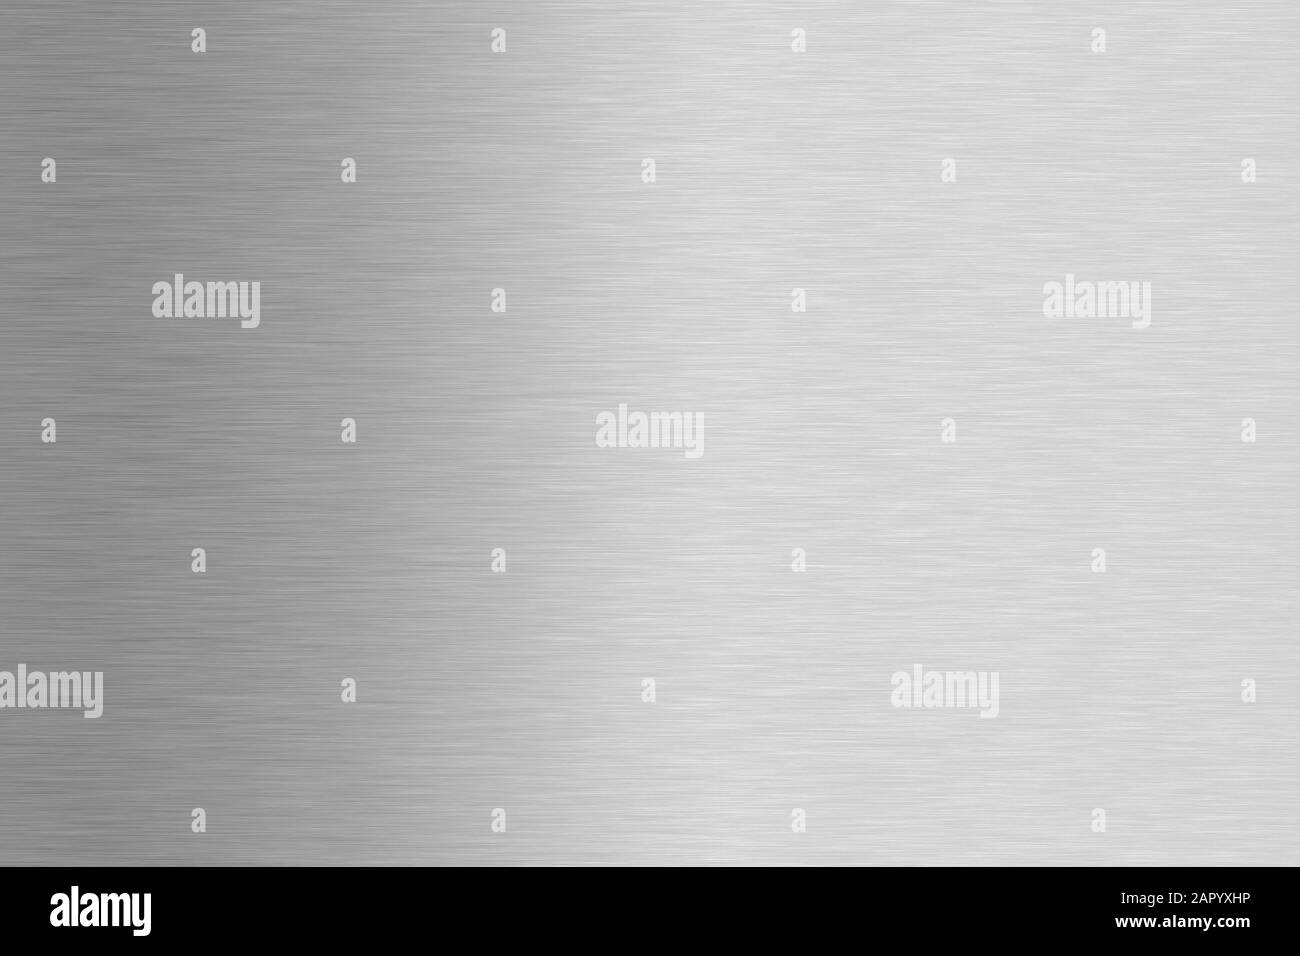 Brushed metal texture backgroung Stock Photo - Alamy